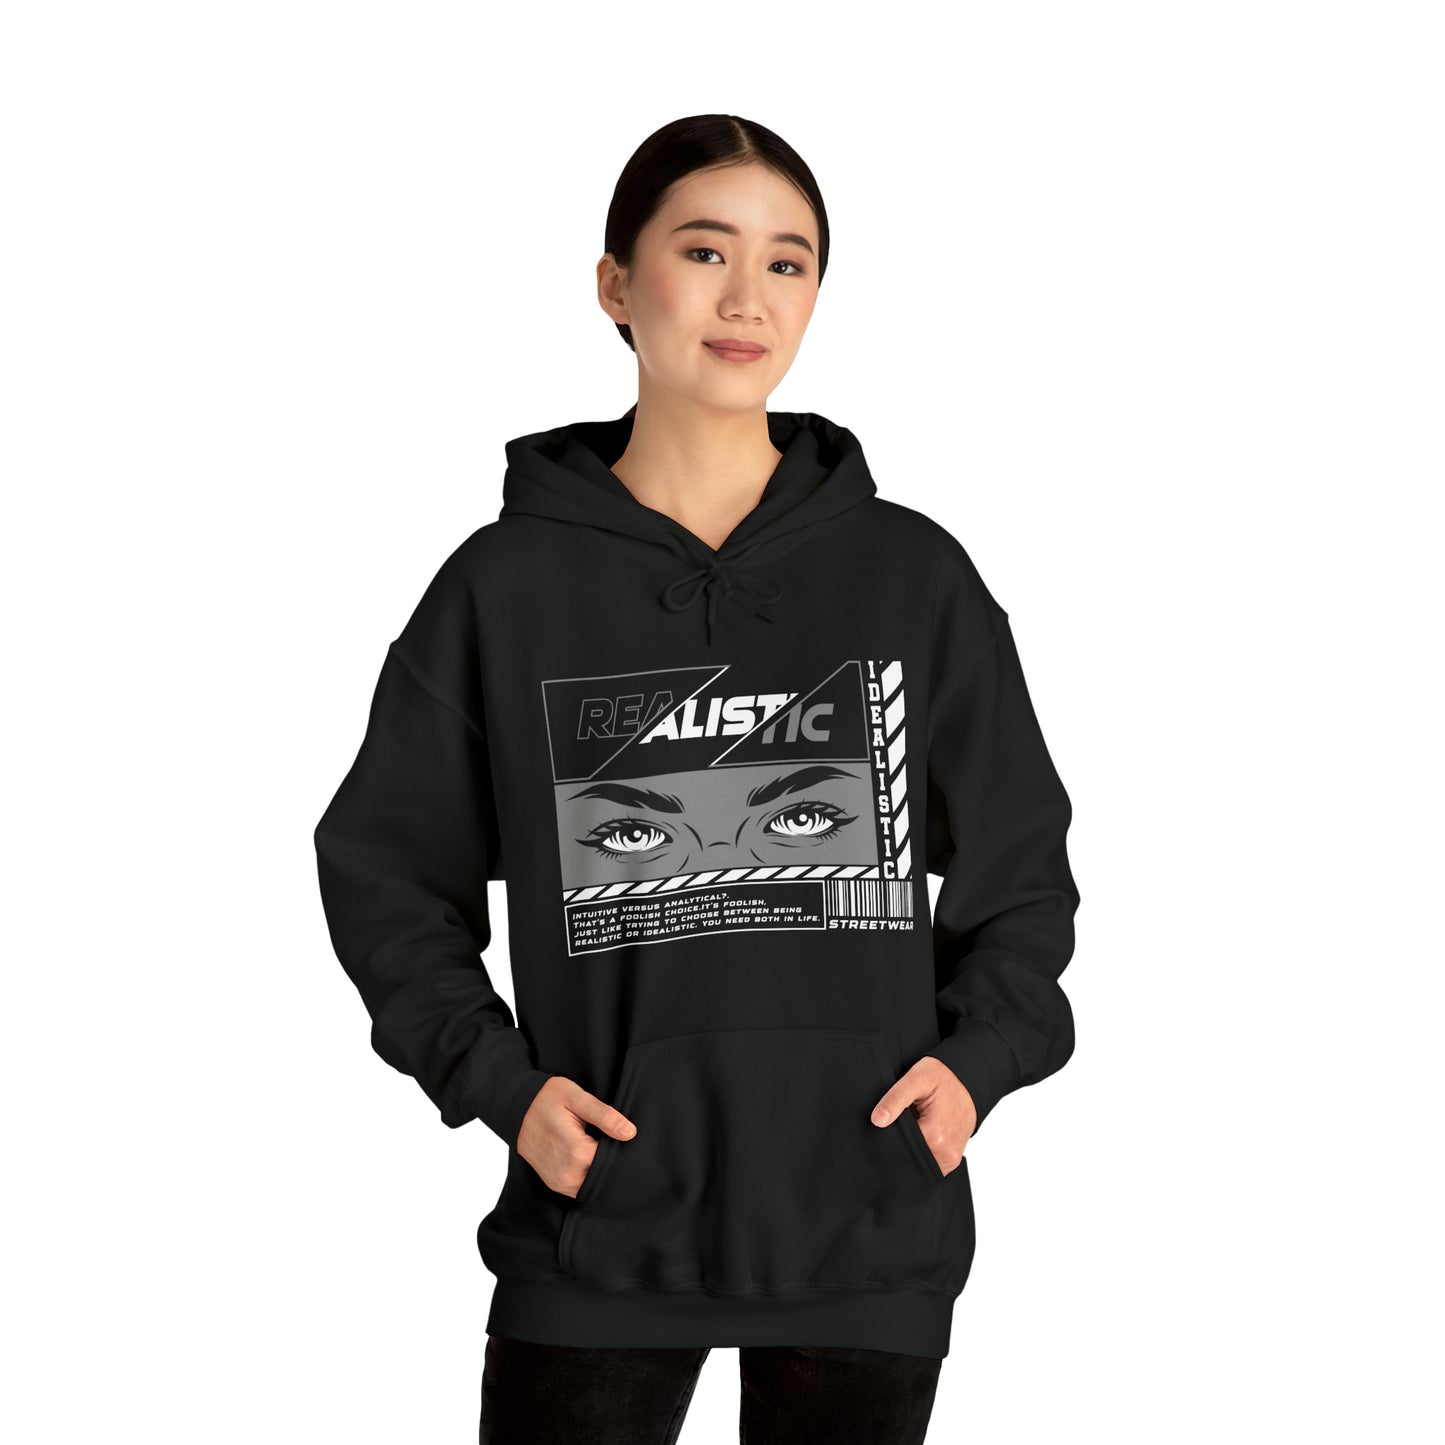 Realistic Or Idealstic Unisex Heavy Blend Hoodie